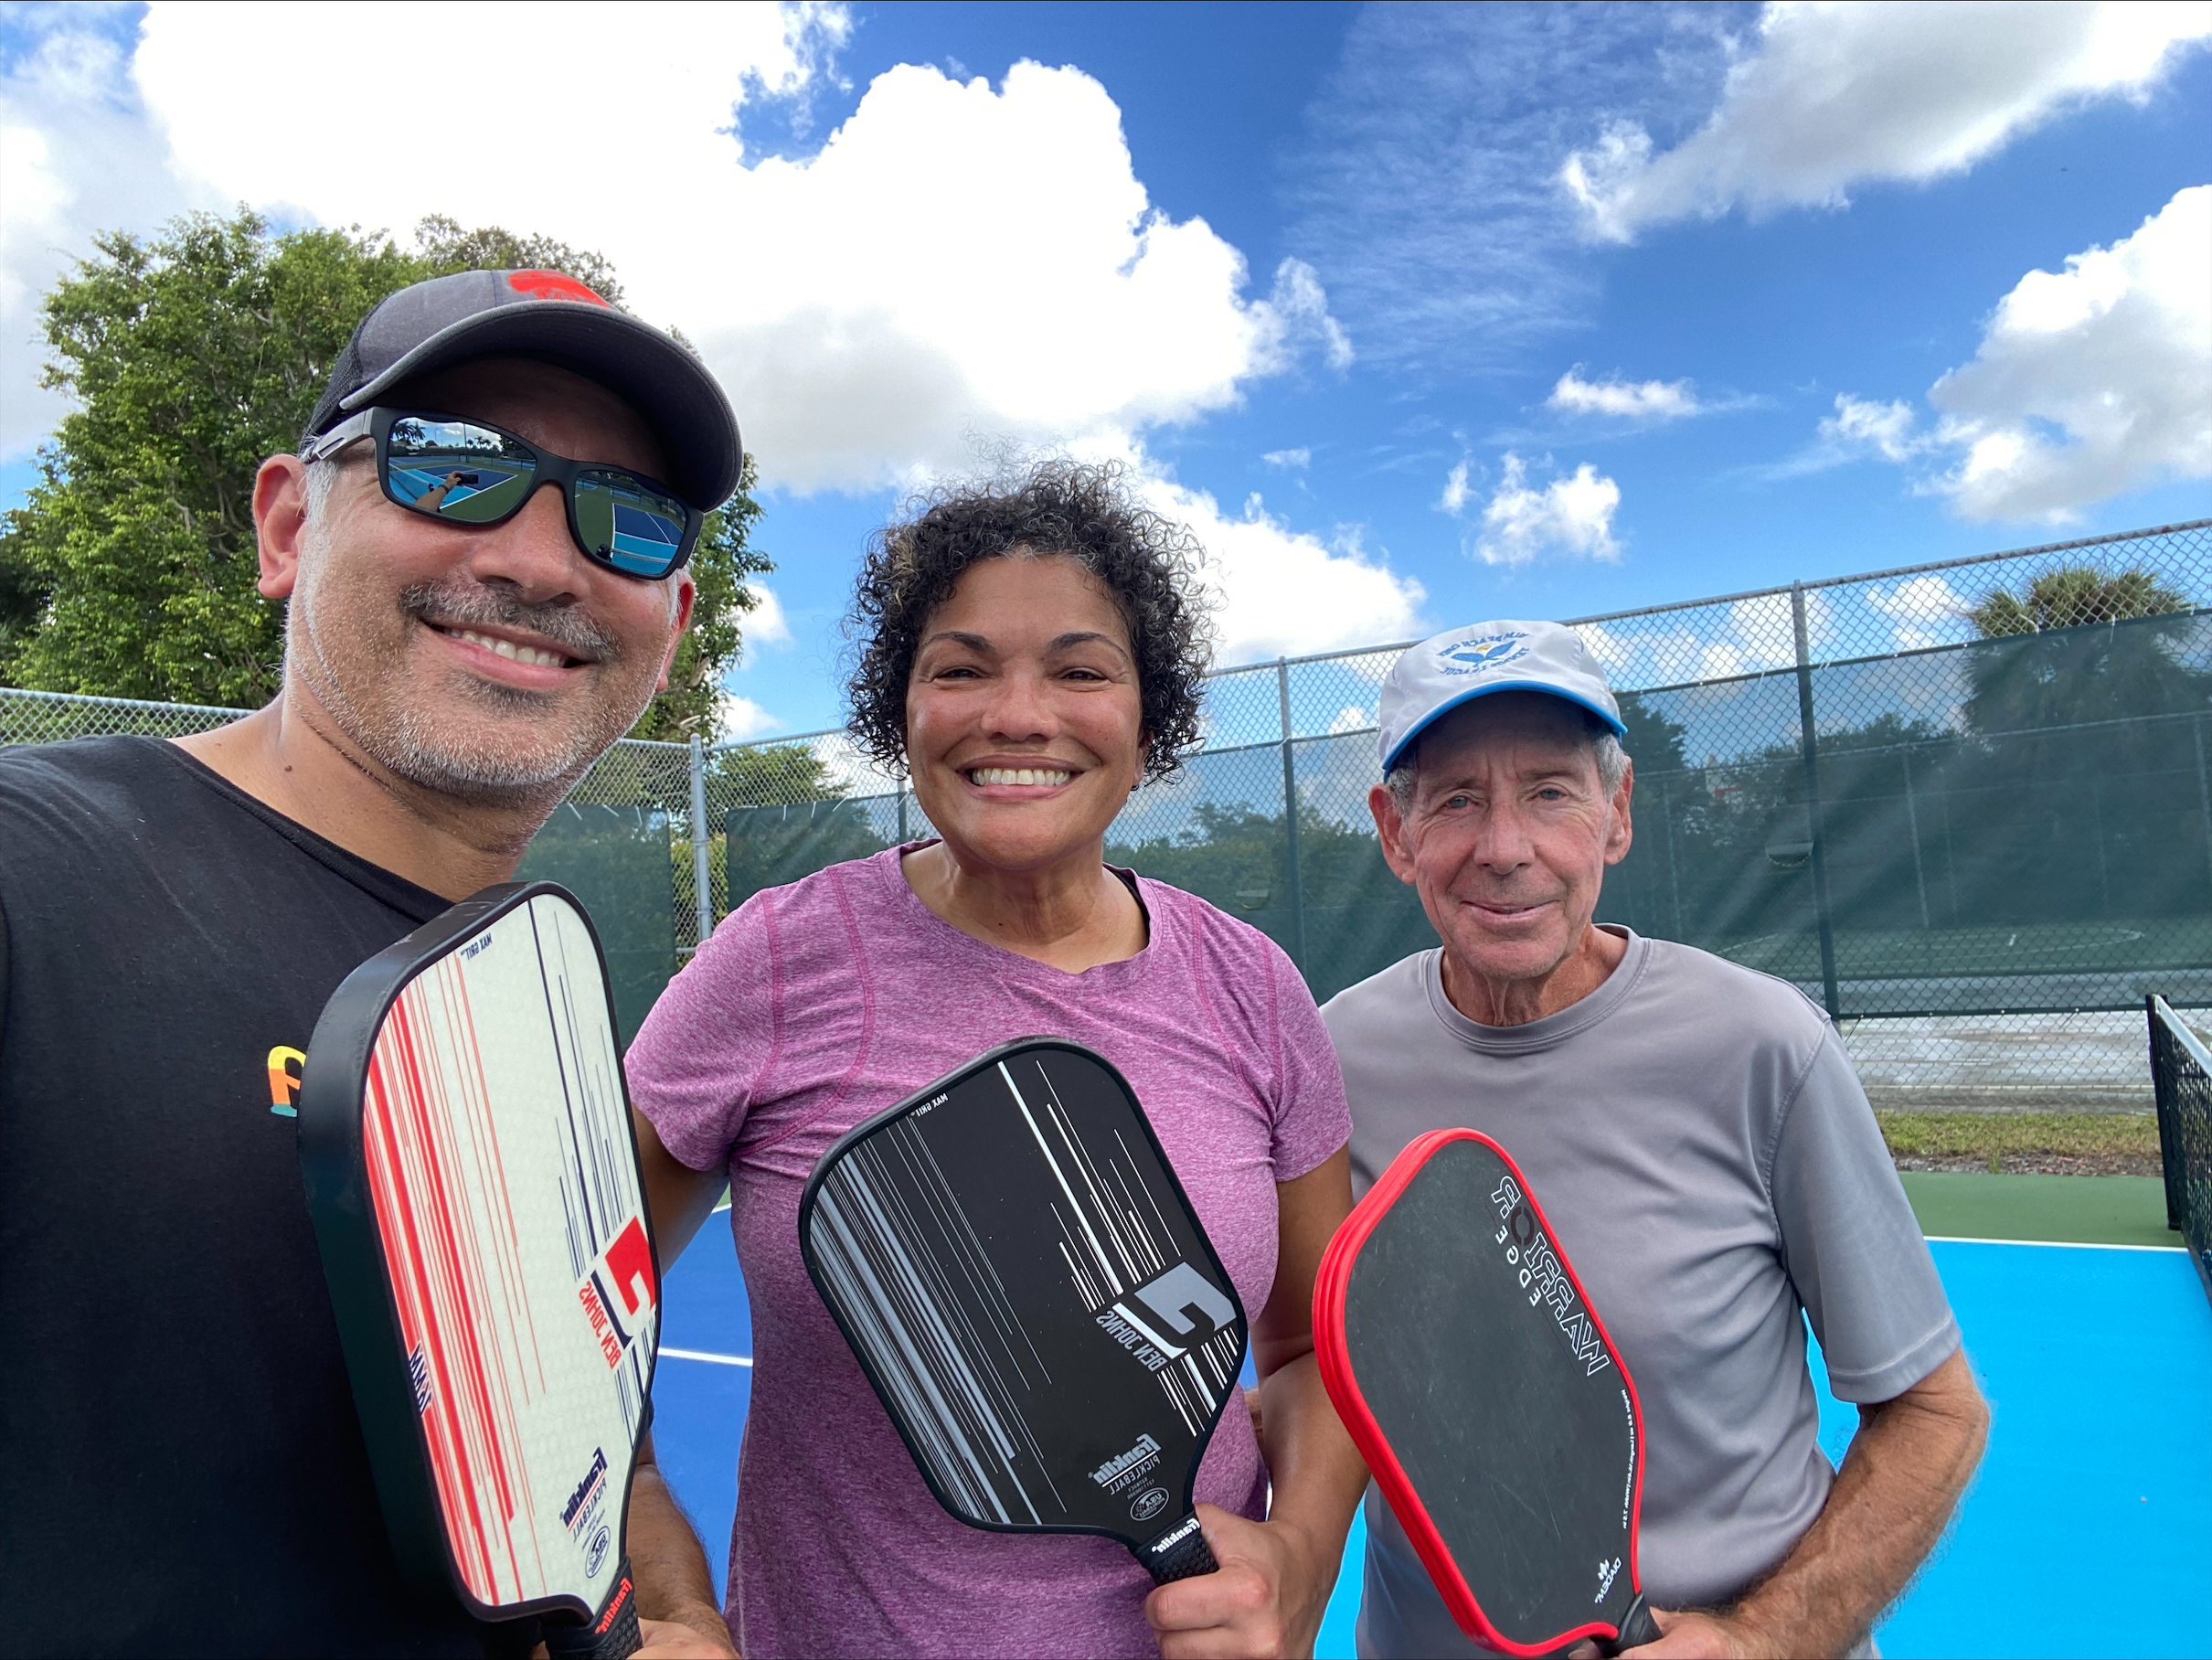 Bob with Jaime and Sandra after a pickleball lesson in Lake Worth, FL